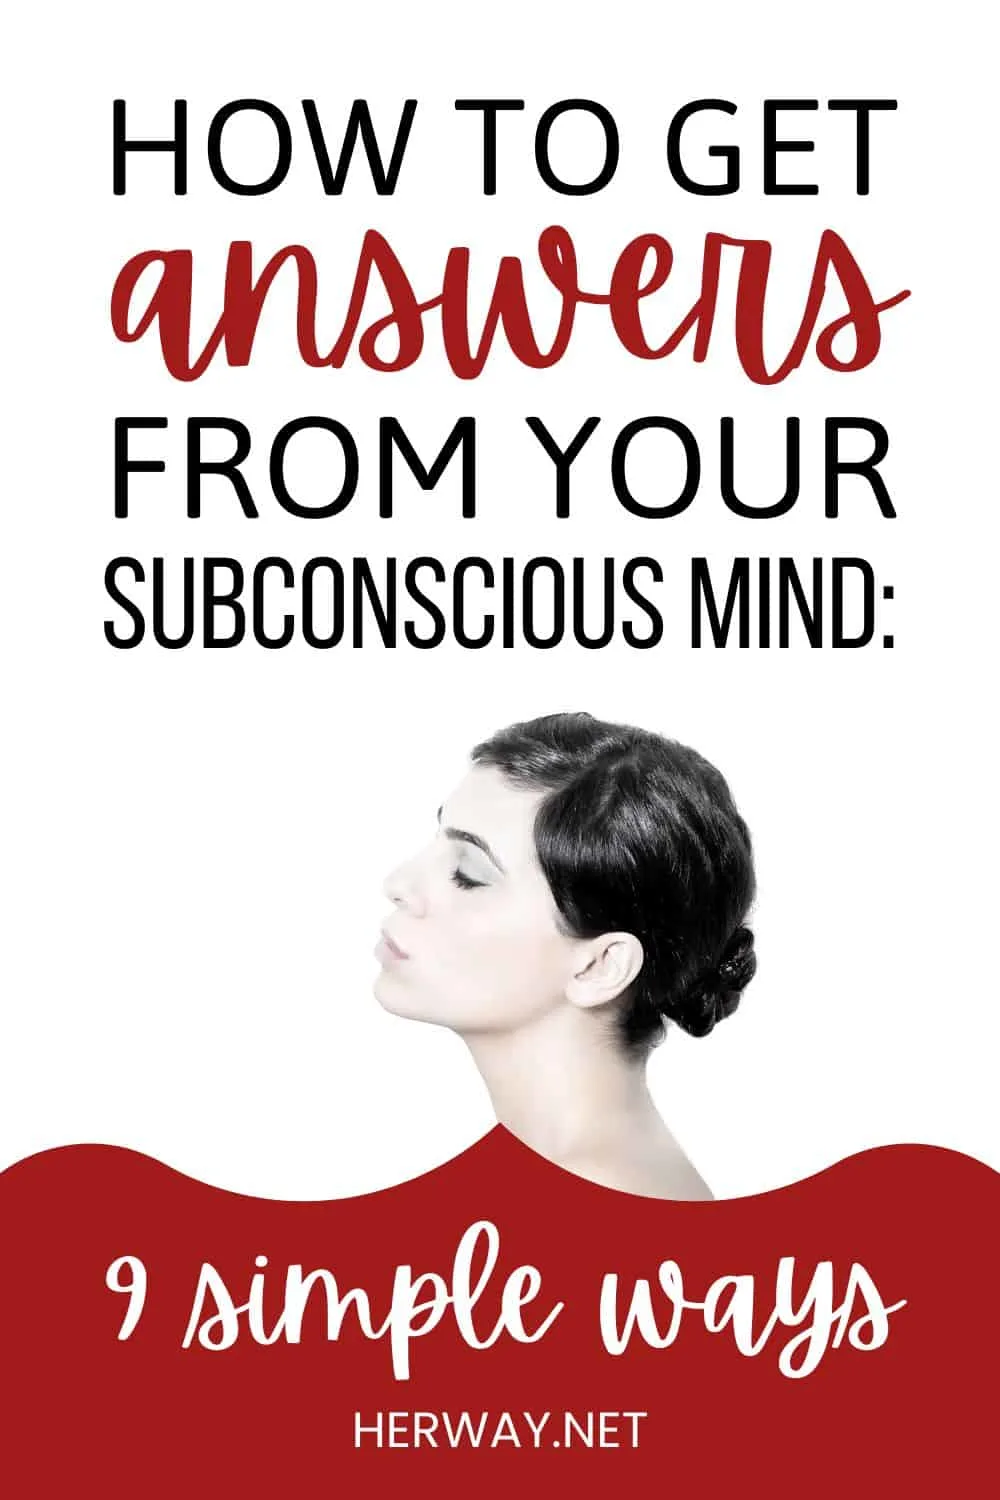 How To Get Answers From Your Subconscious Mind 9 Simple Ways Pinterest